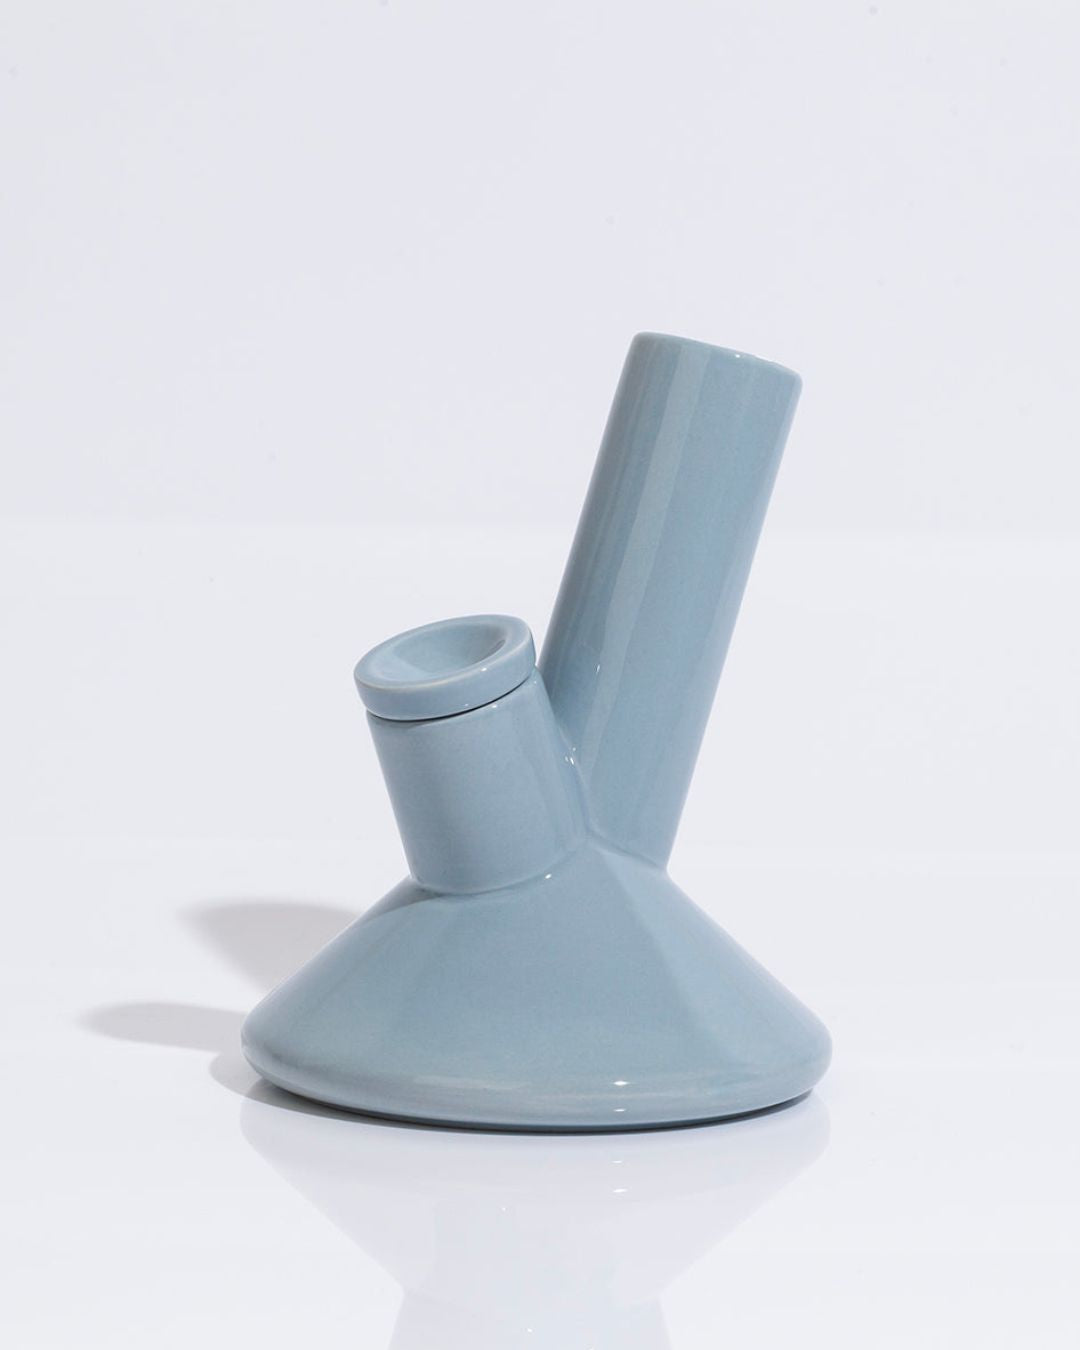 Luxury ceramic bong in sky blue on a white background.